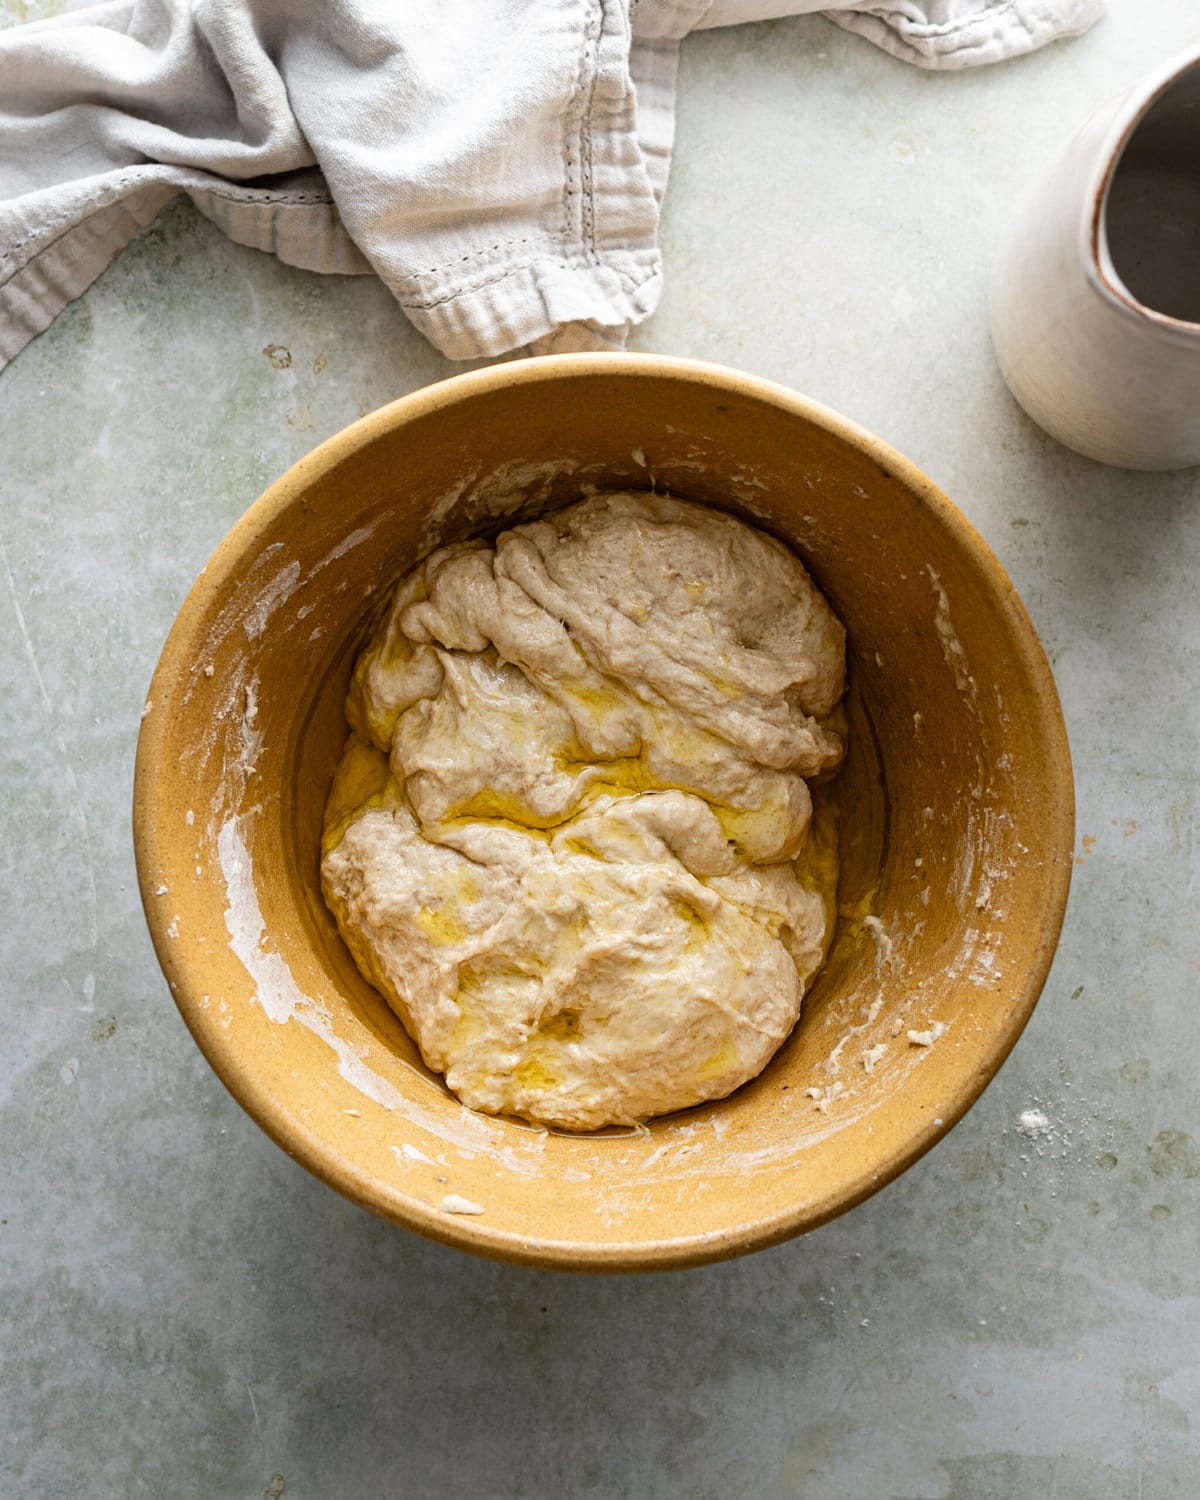 Dough coated in olive oil inside a yellow mixing bowl.